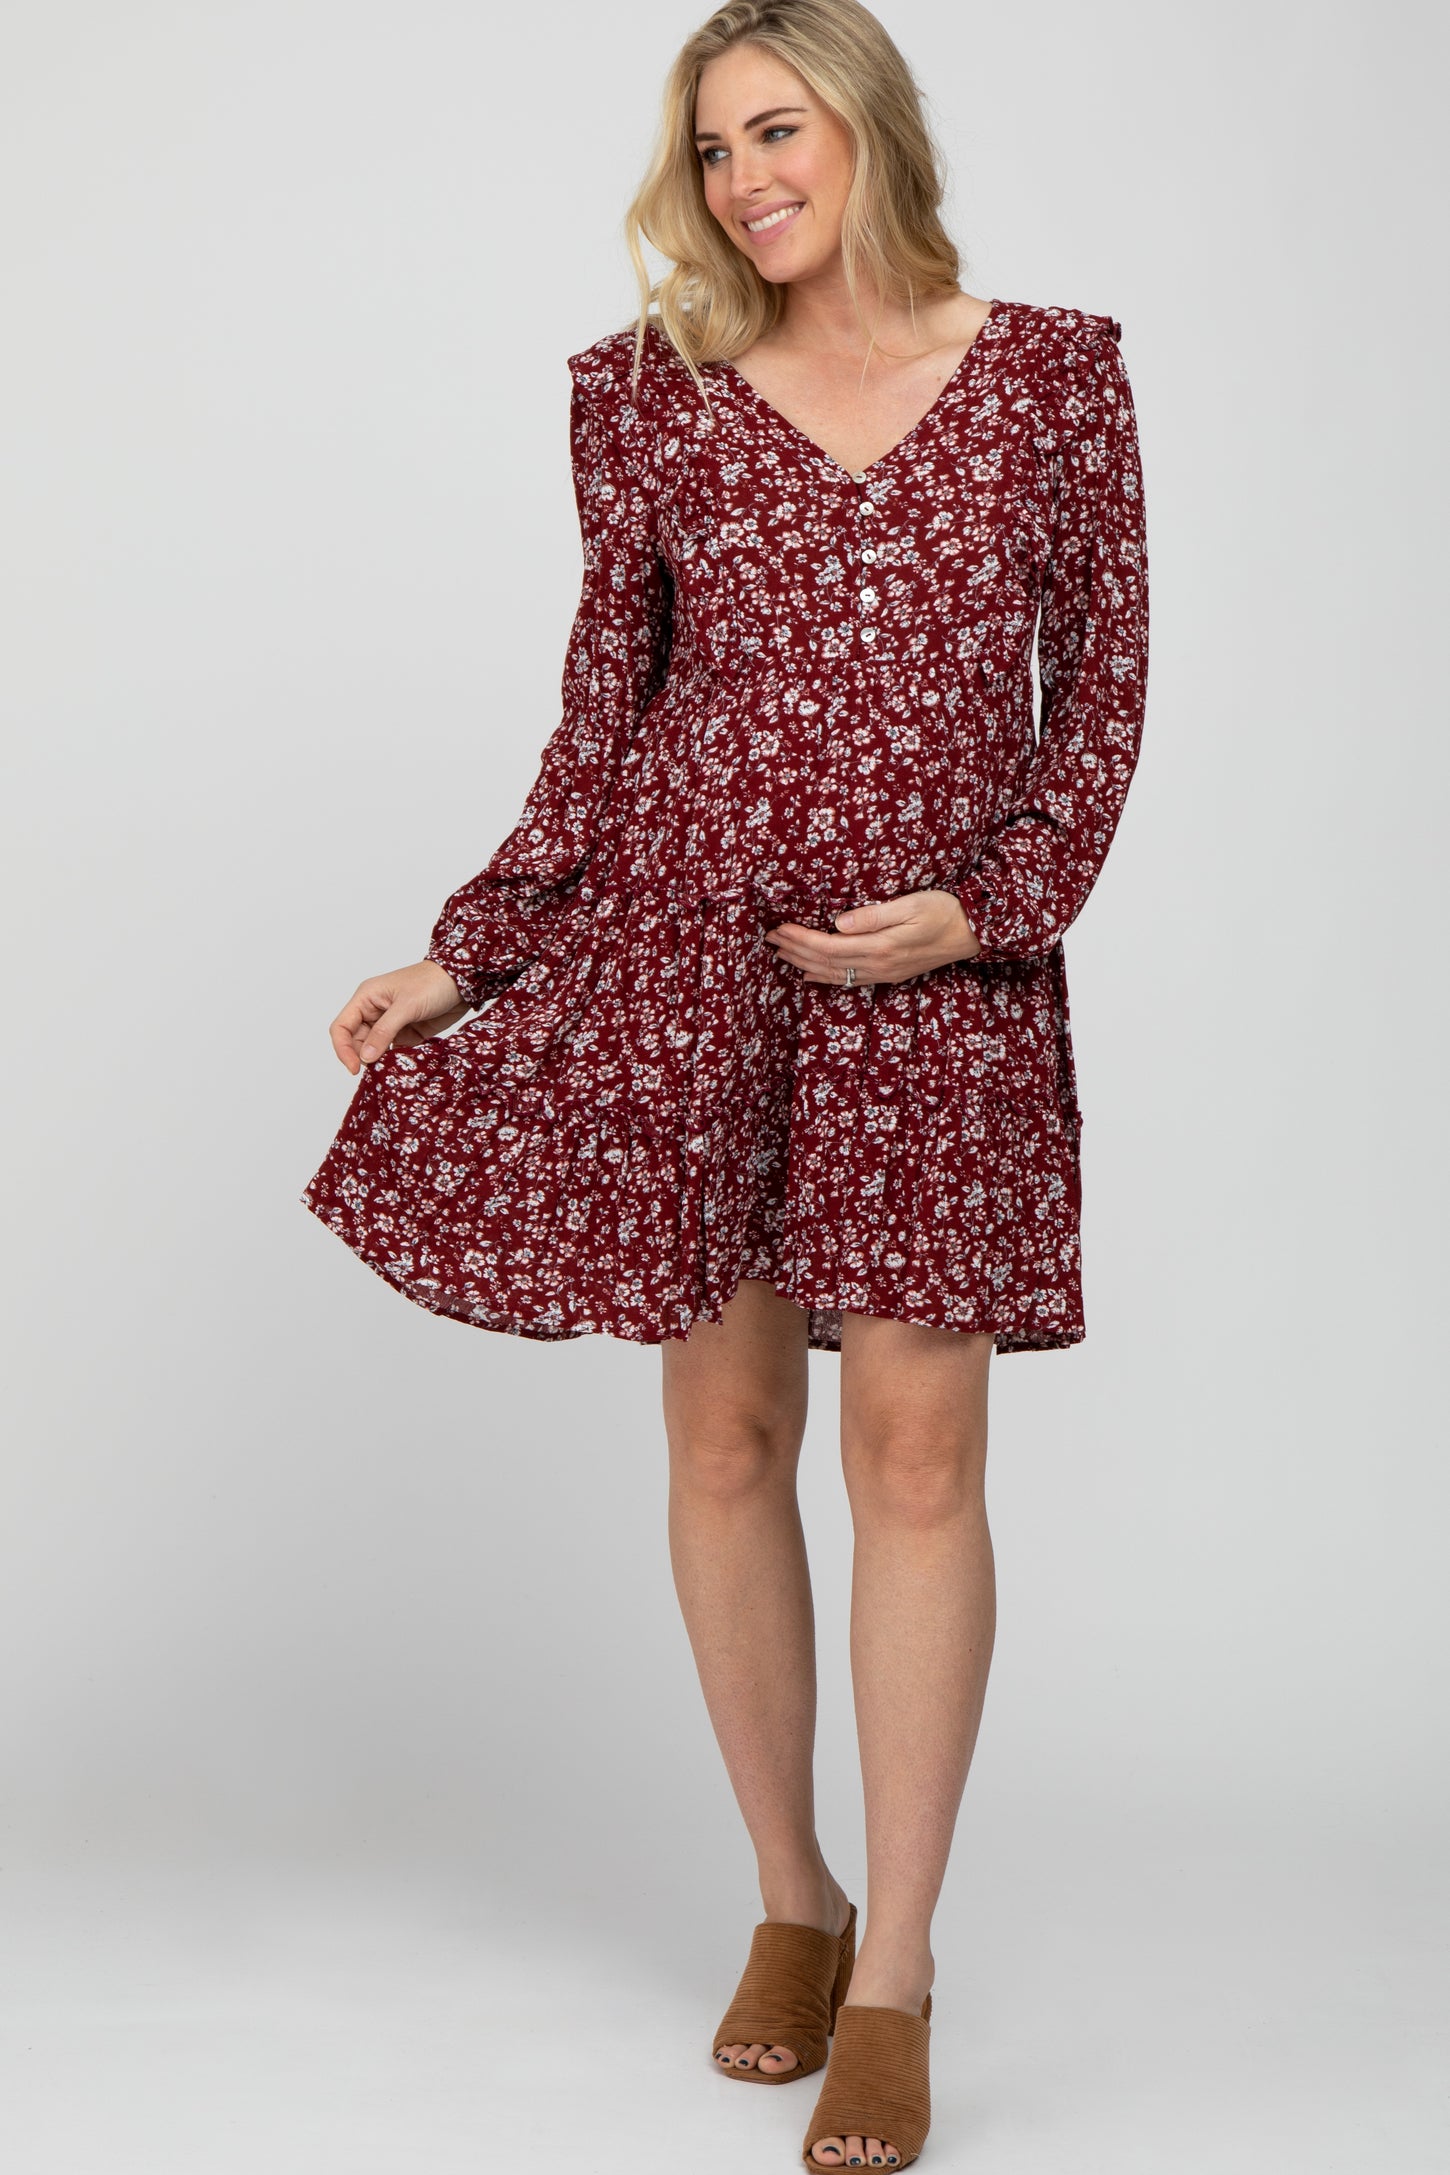 Burgundy Floral Ruffle Tiered Maternity Dress